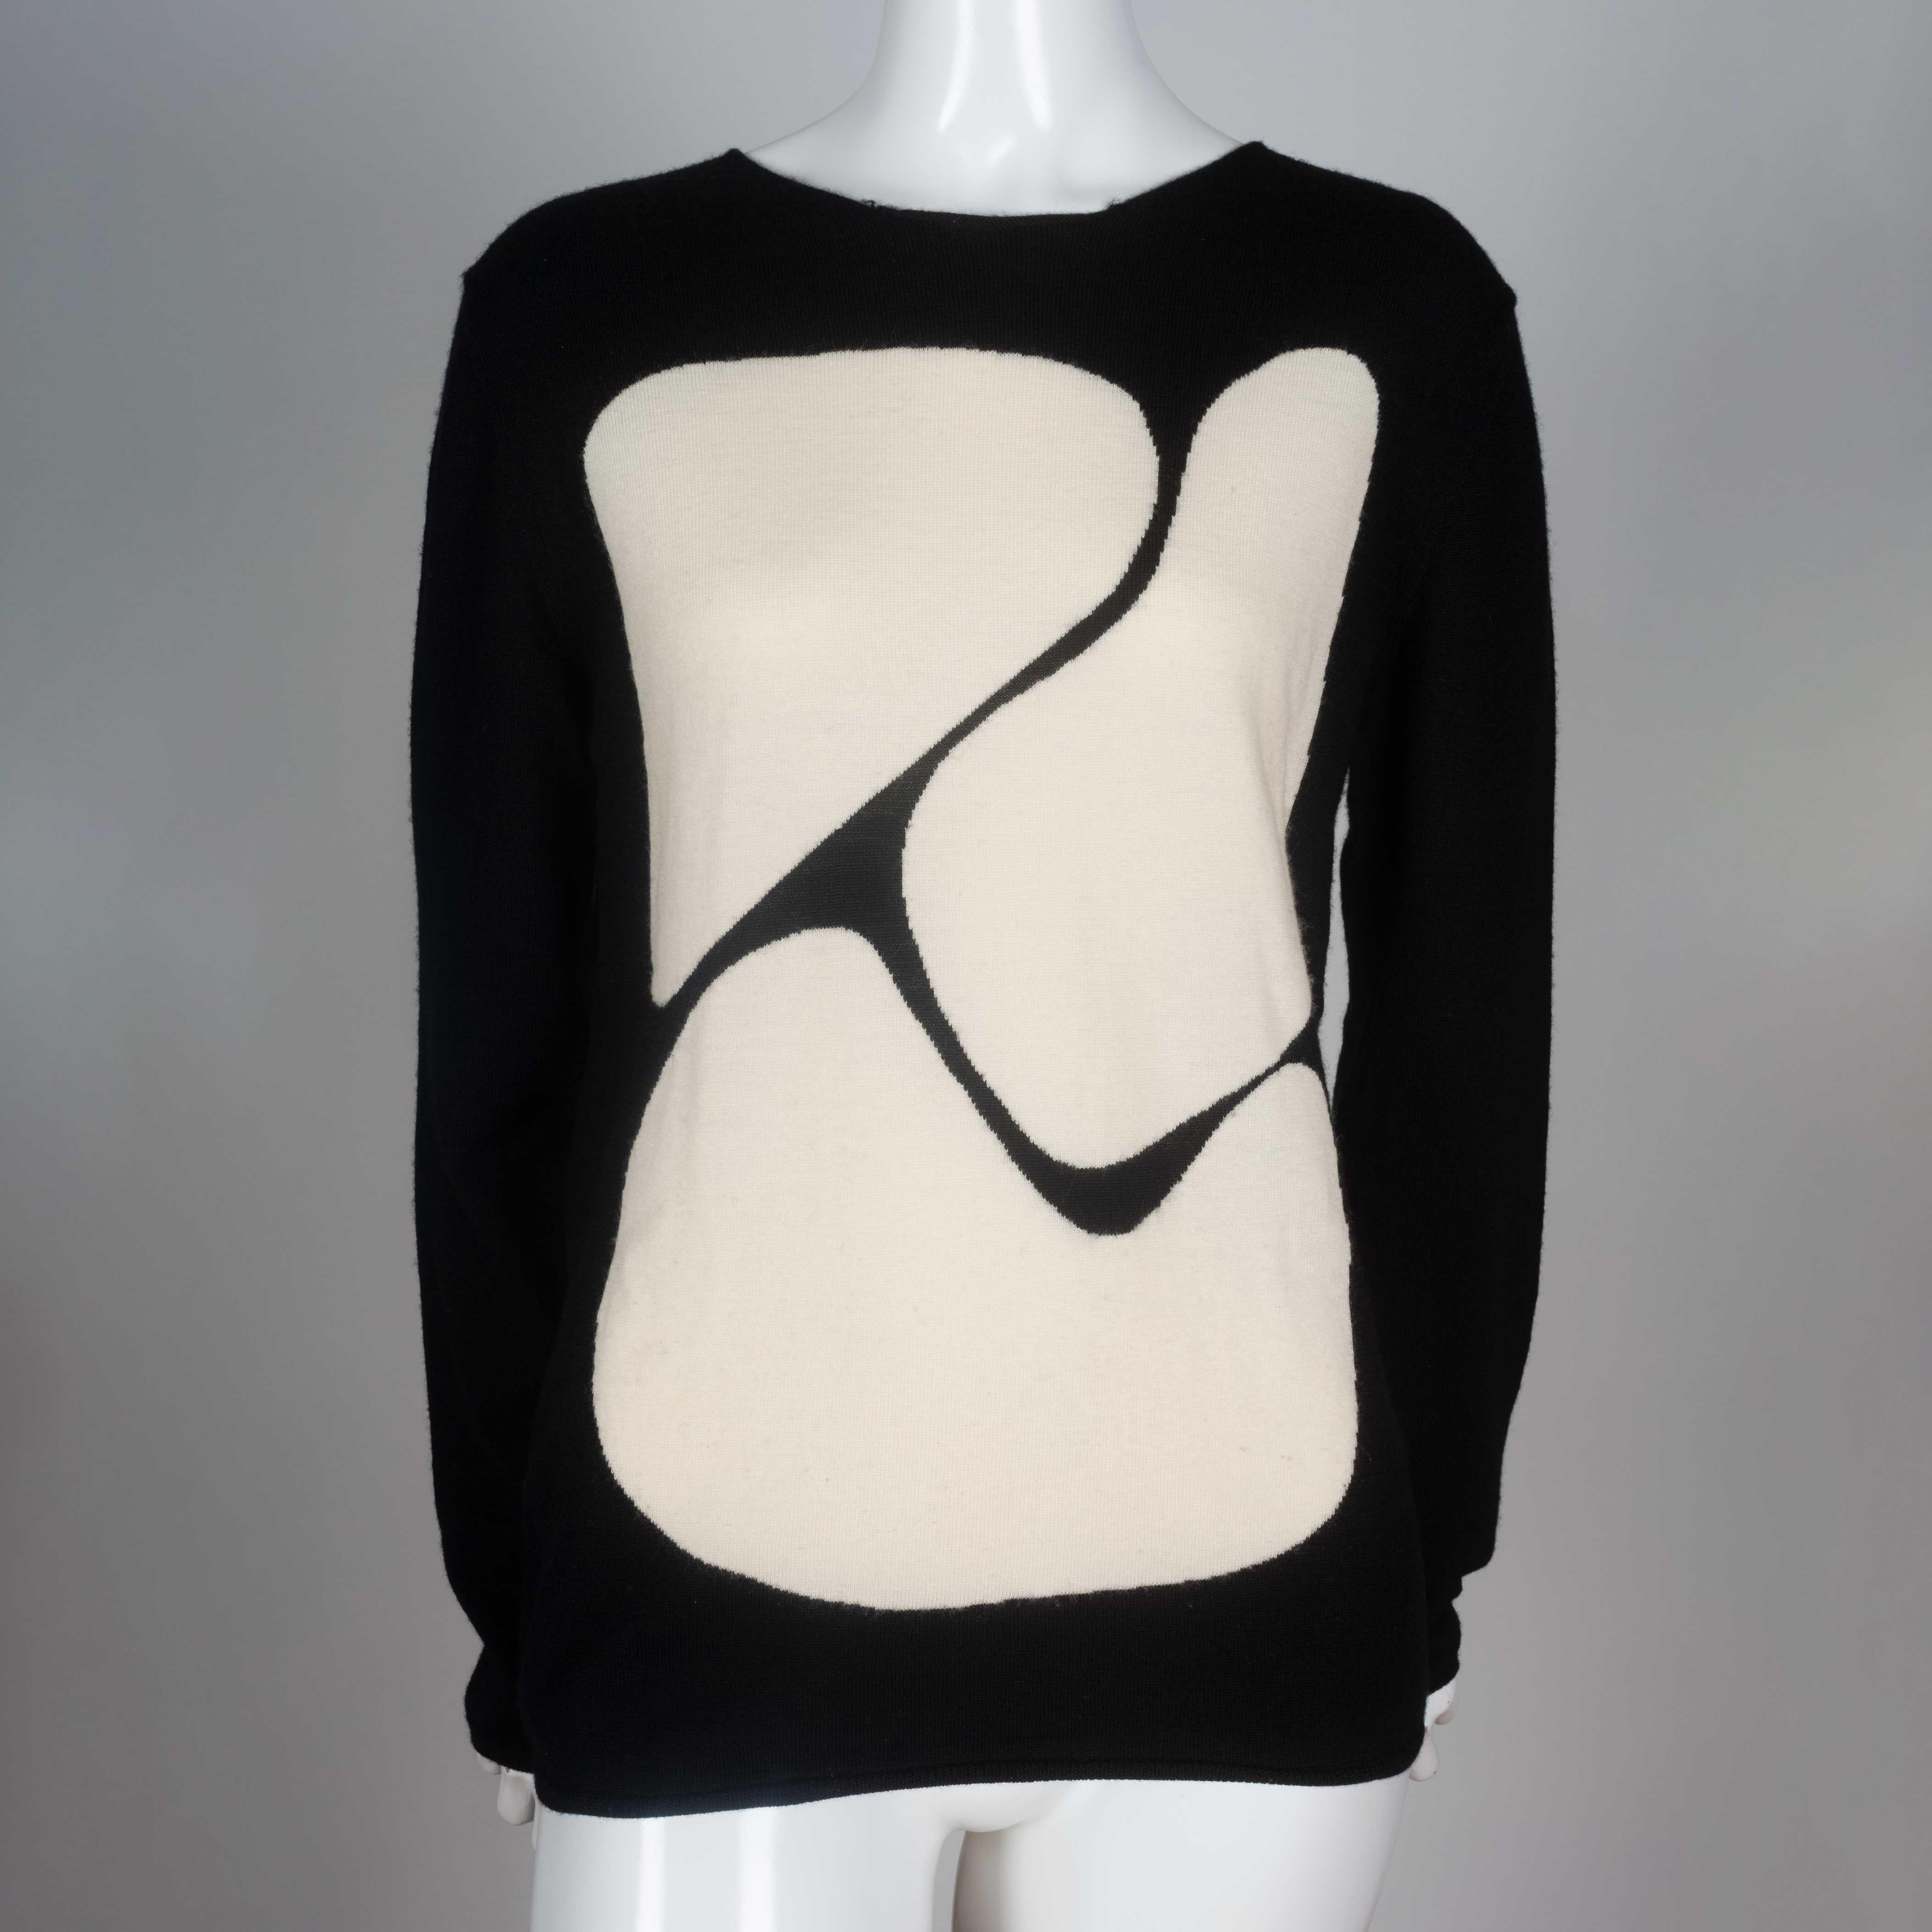 Comme des Garcons black, long sleeve wool shirt with off-white abstract shapes design. 

YEAR: Unknown
MARKED SIZE: S
US WOMEN'S: M
US MEN'S: S
FIT: Regular
CHEST: 18